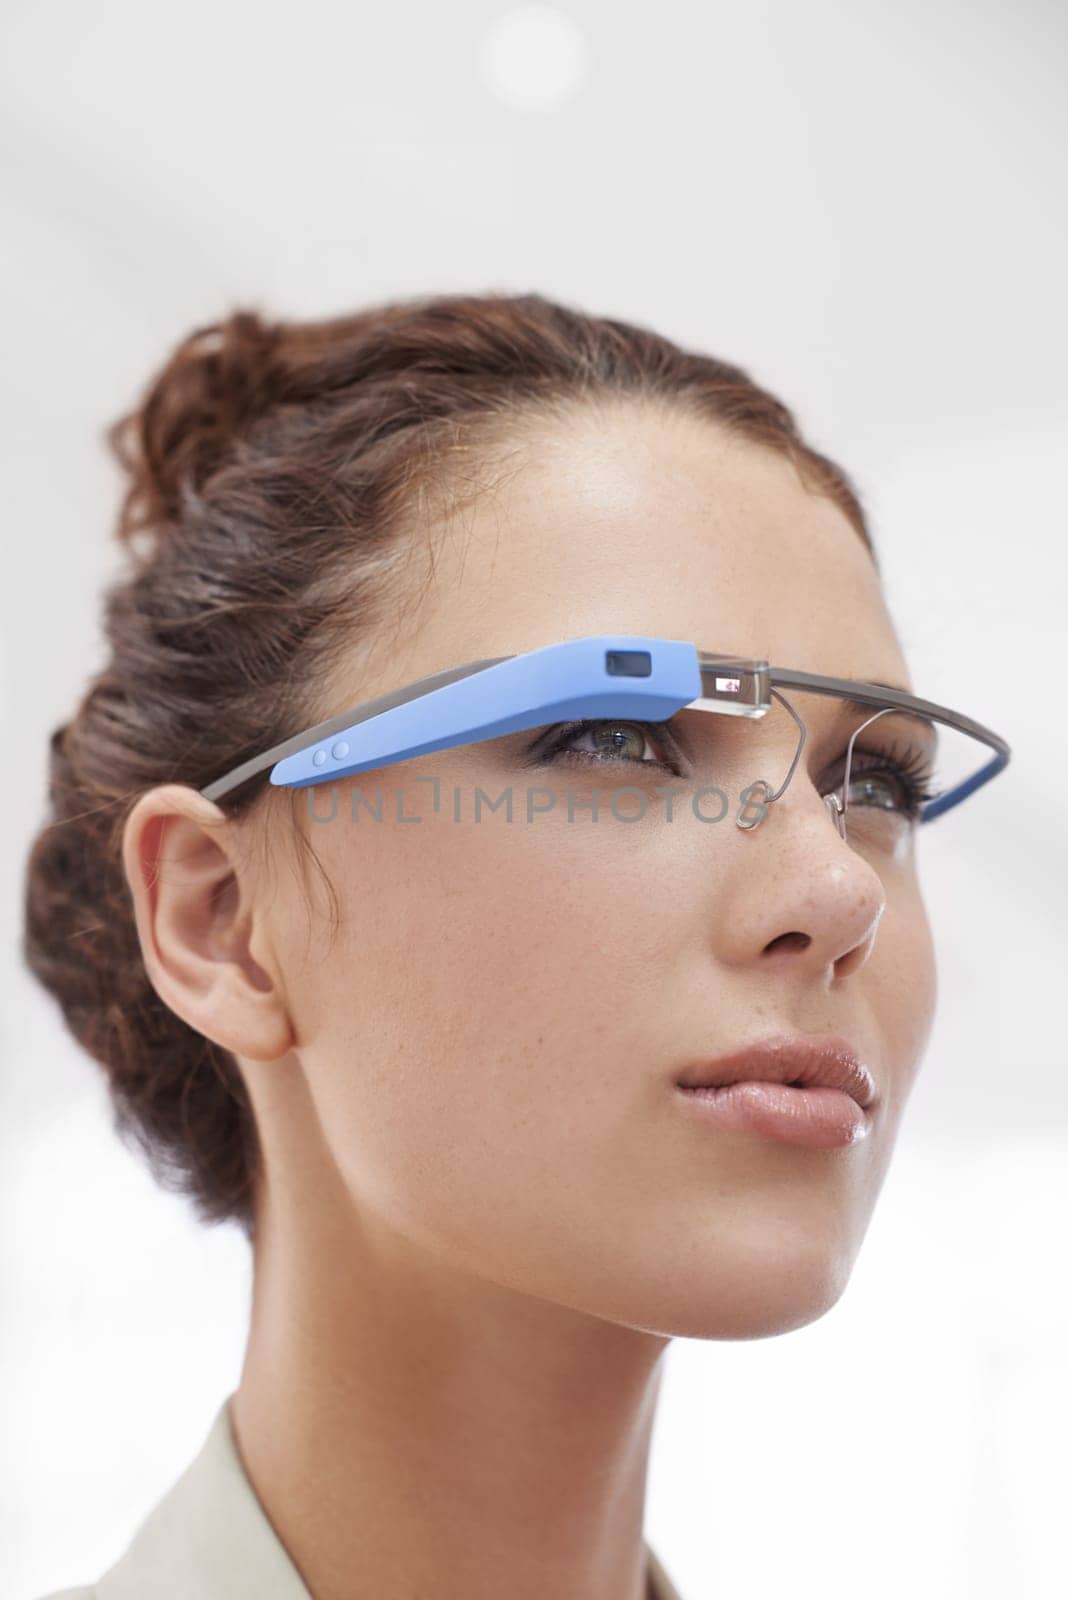 Augmented reality, business and woman with smart glasses for internet networking in office. Future technology, workplace and consultant with designer VR eyewear, vision and online communication